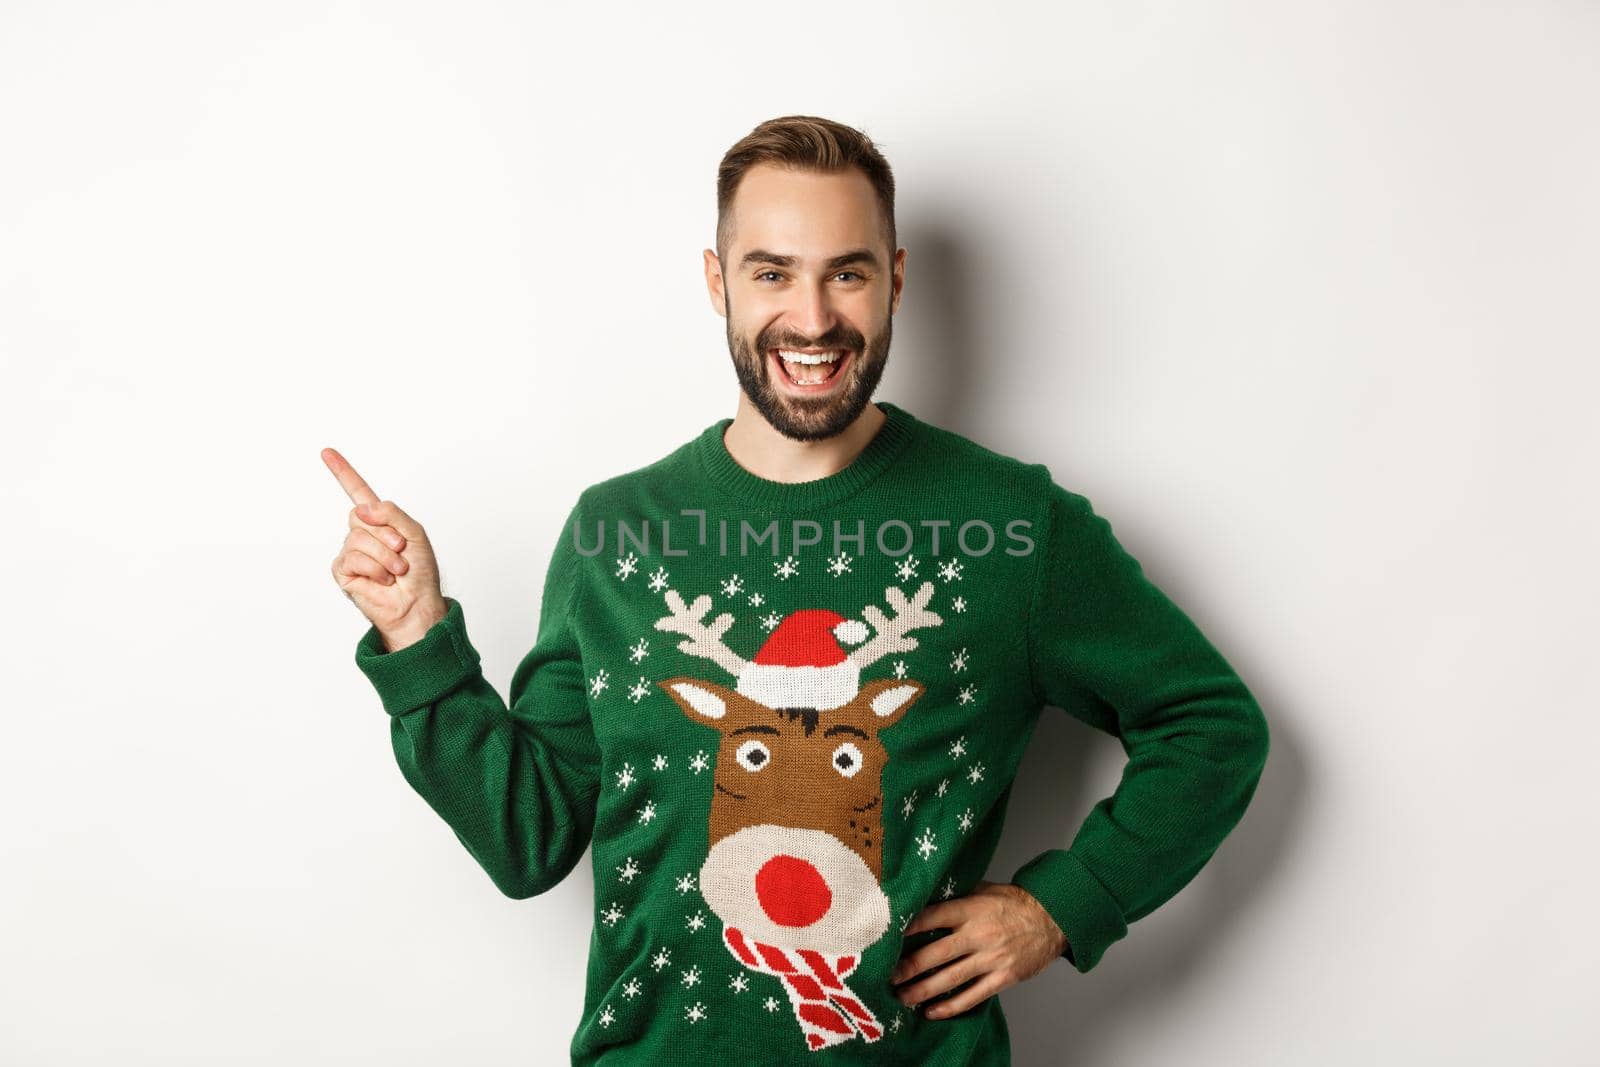 New year celebration and winter holidays concept. Handsome bearded male model in christmas sweater laughing, pointing finger at upper left corner logo, white background.